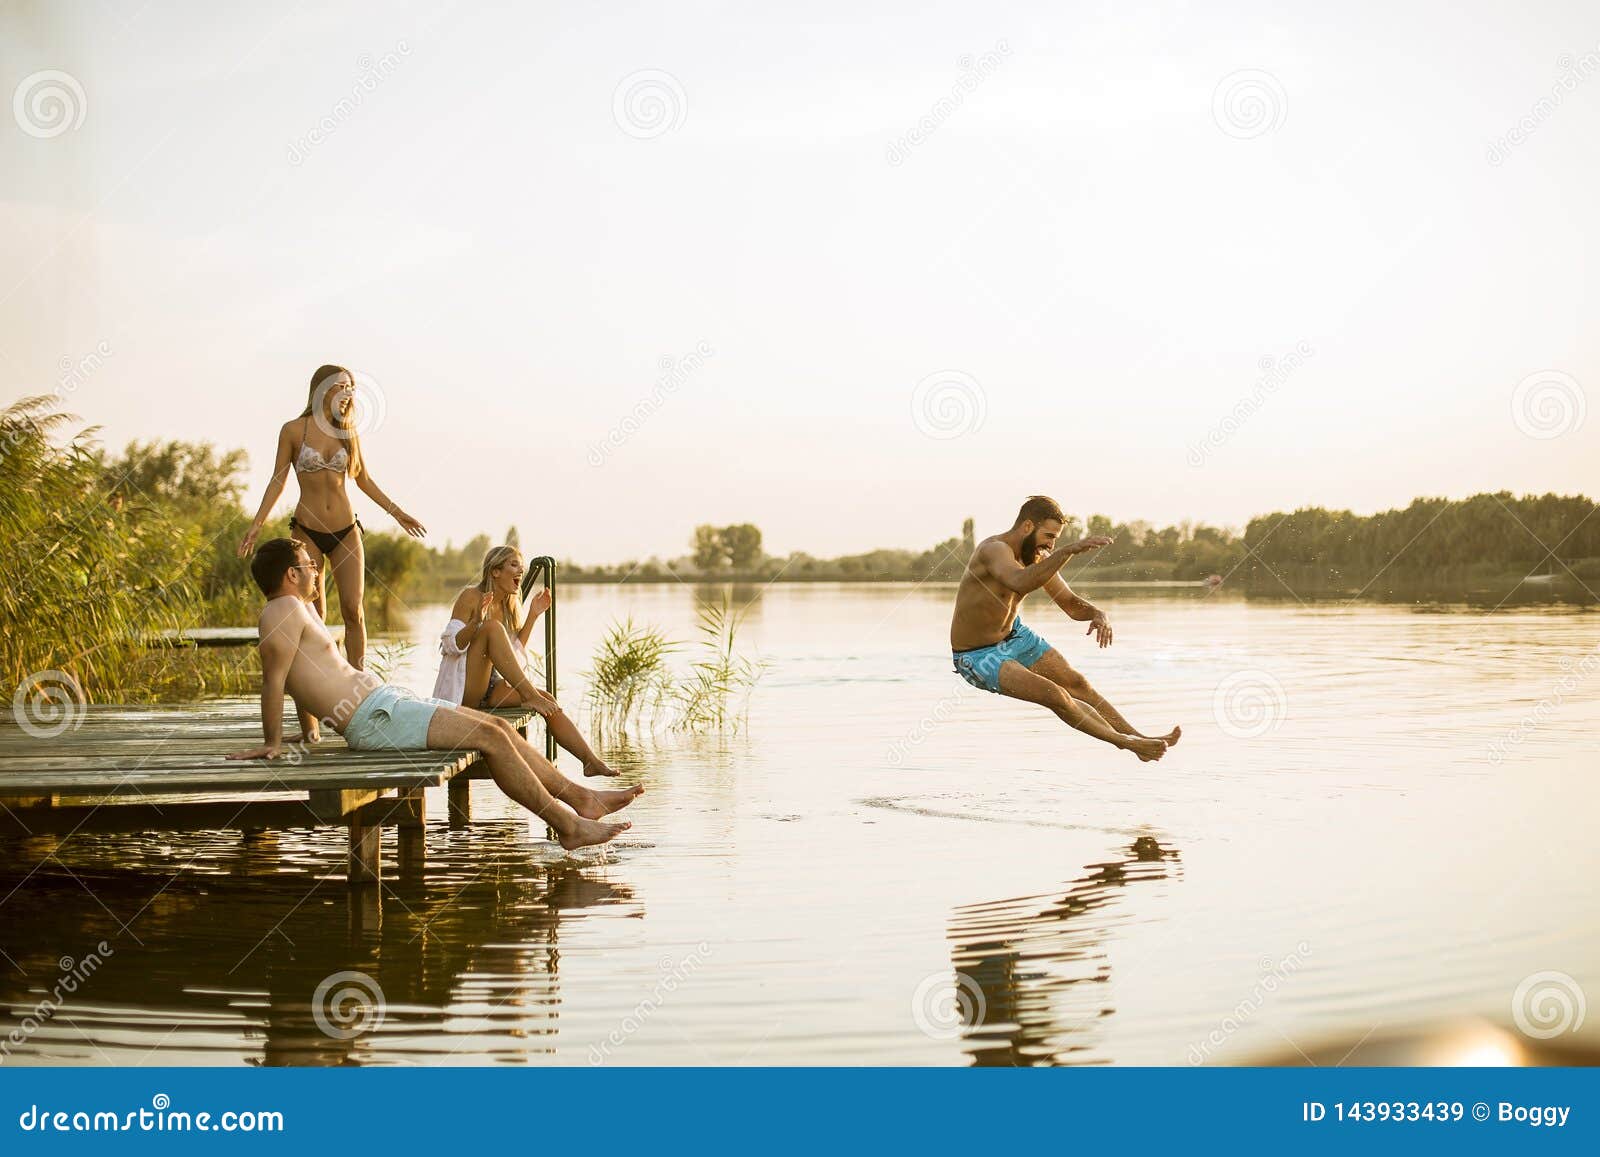 Young People Having Fun At The Lake On A Summer Day Stock Image Image